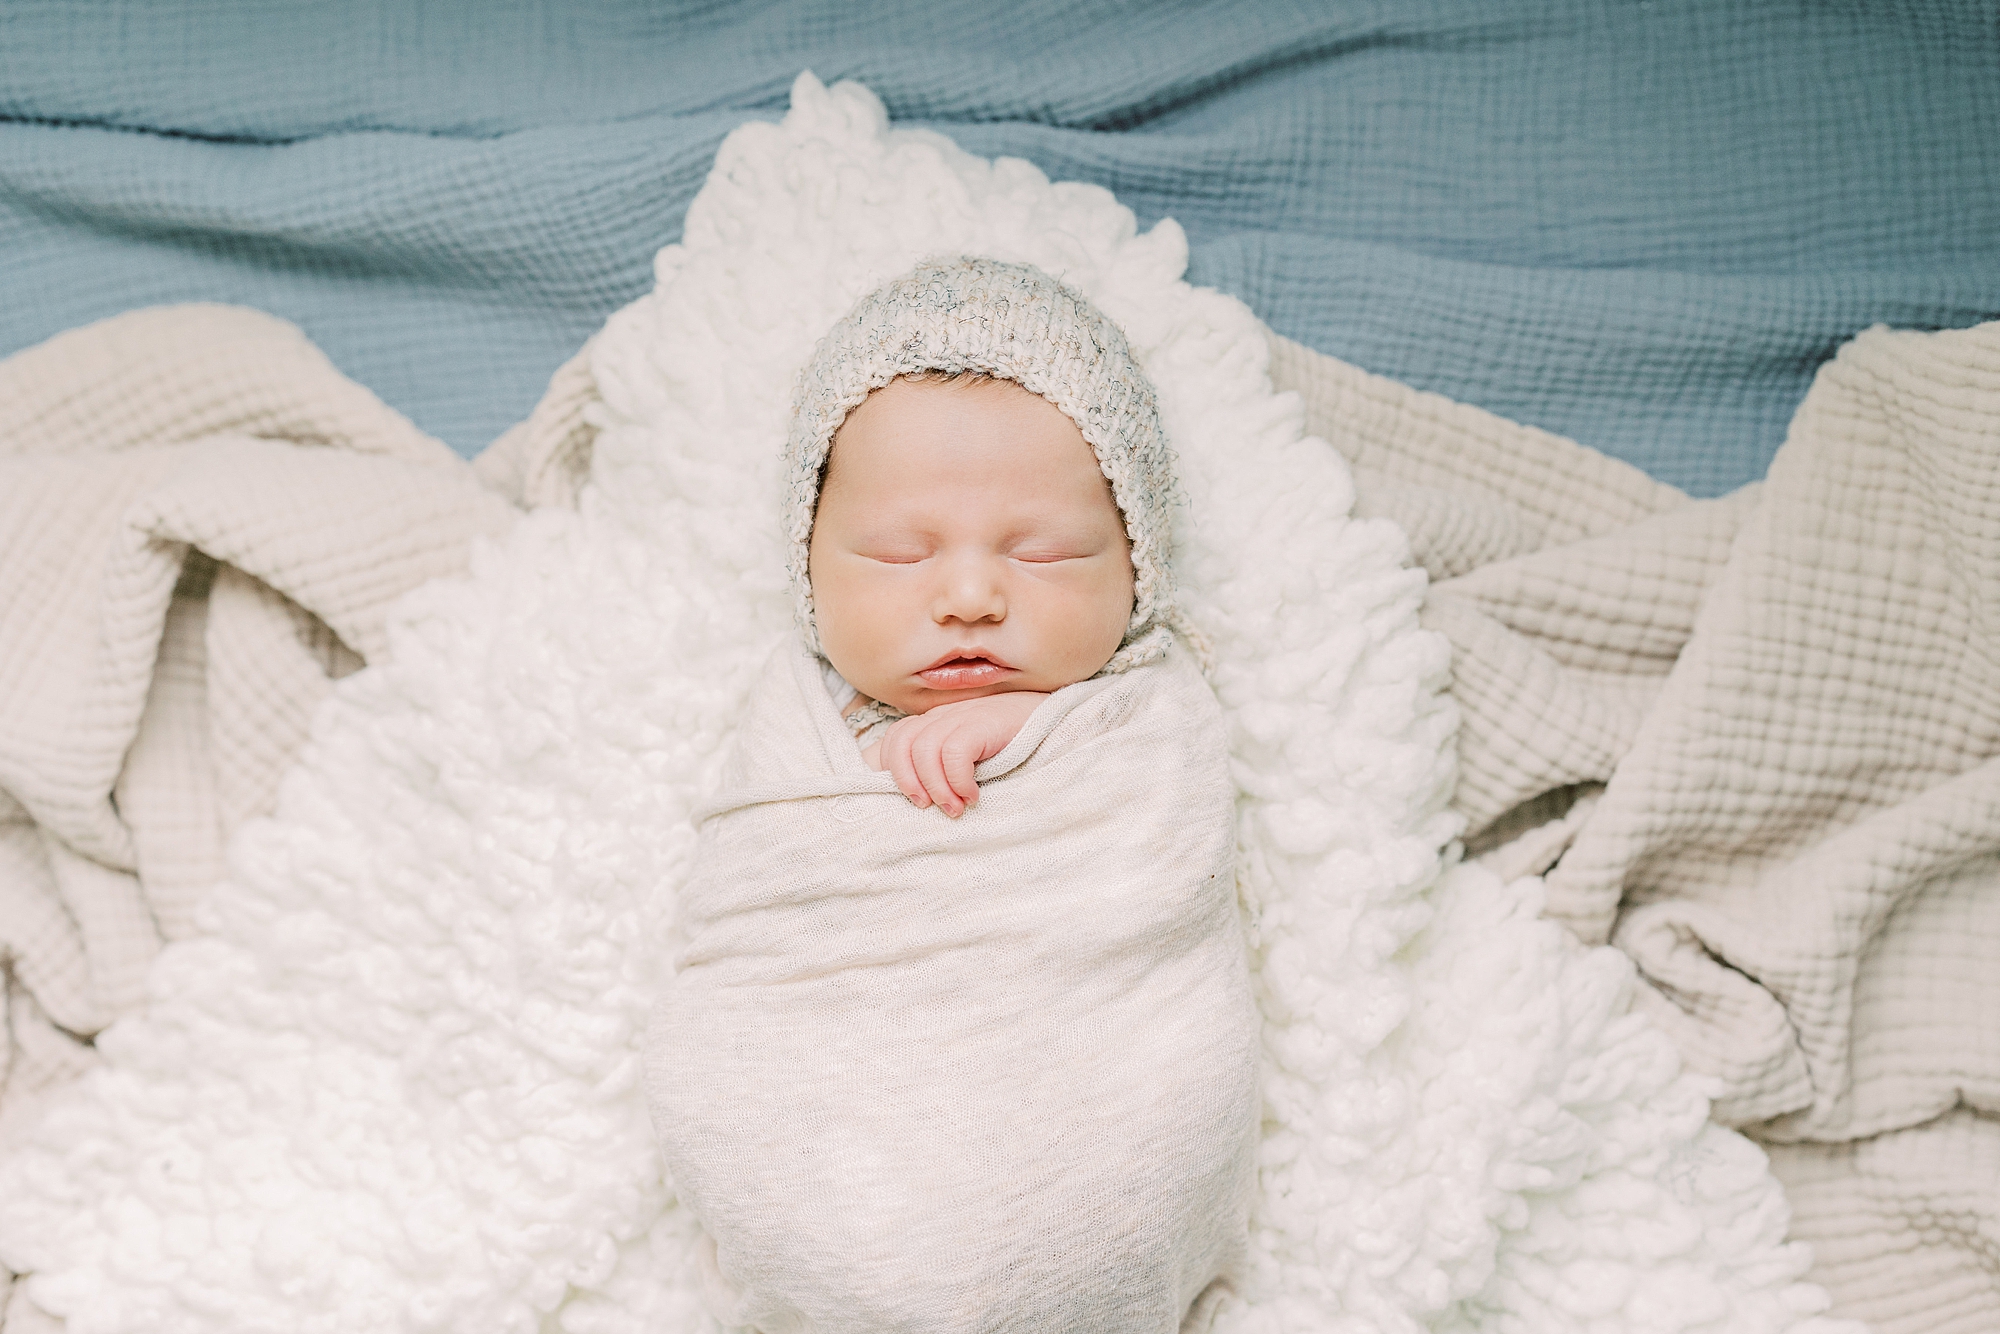 baby lays in white wrap on fluffy white blanket 